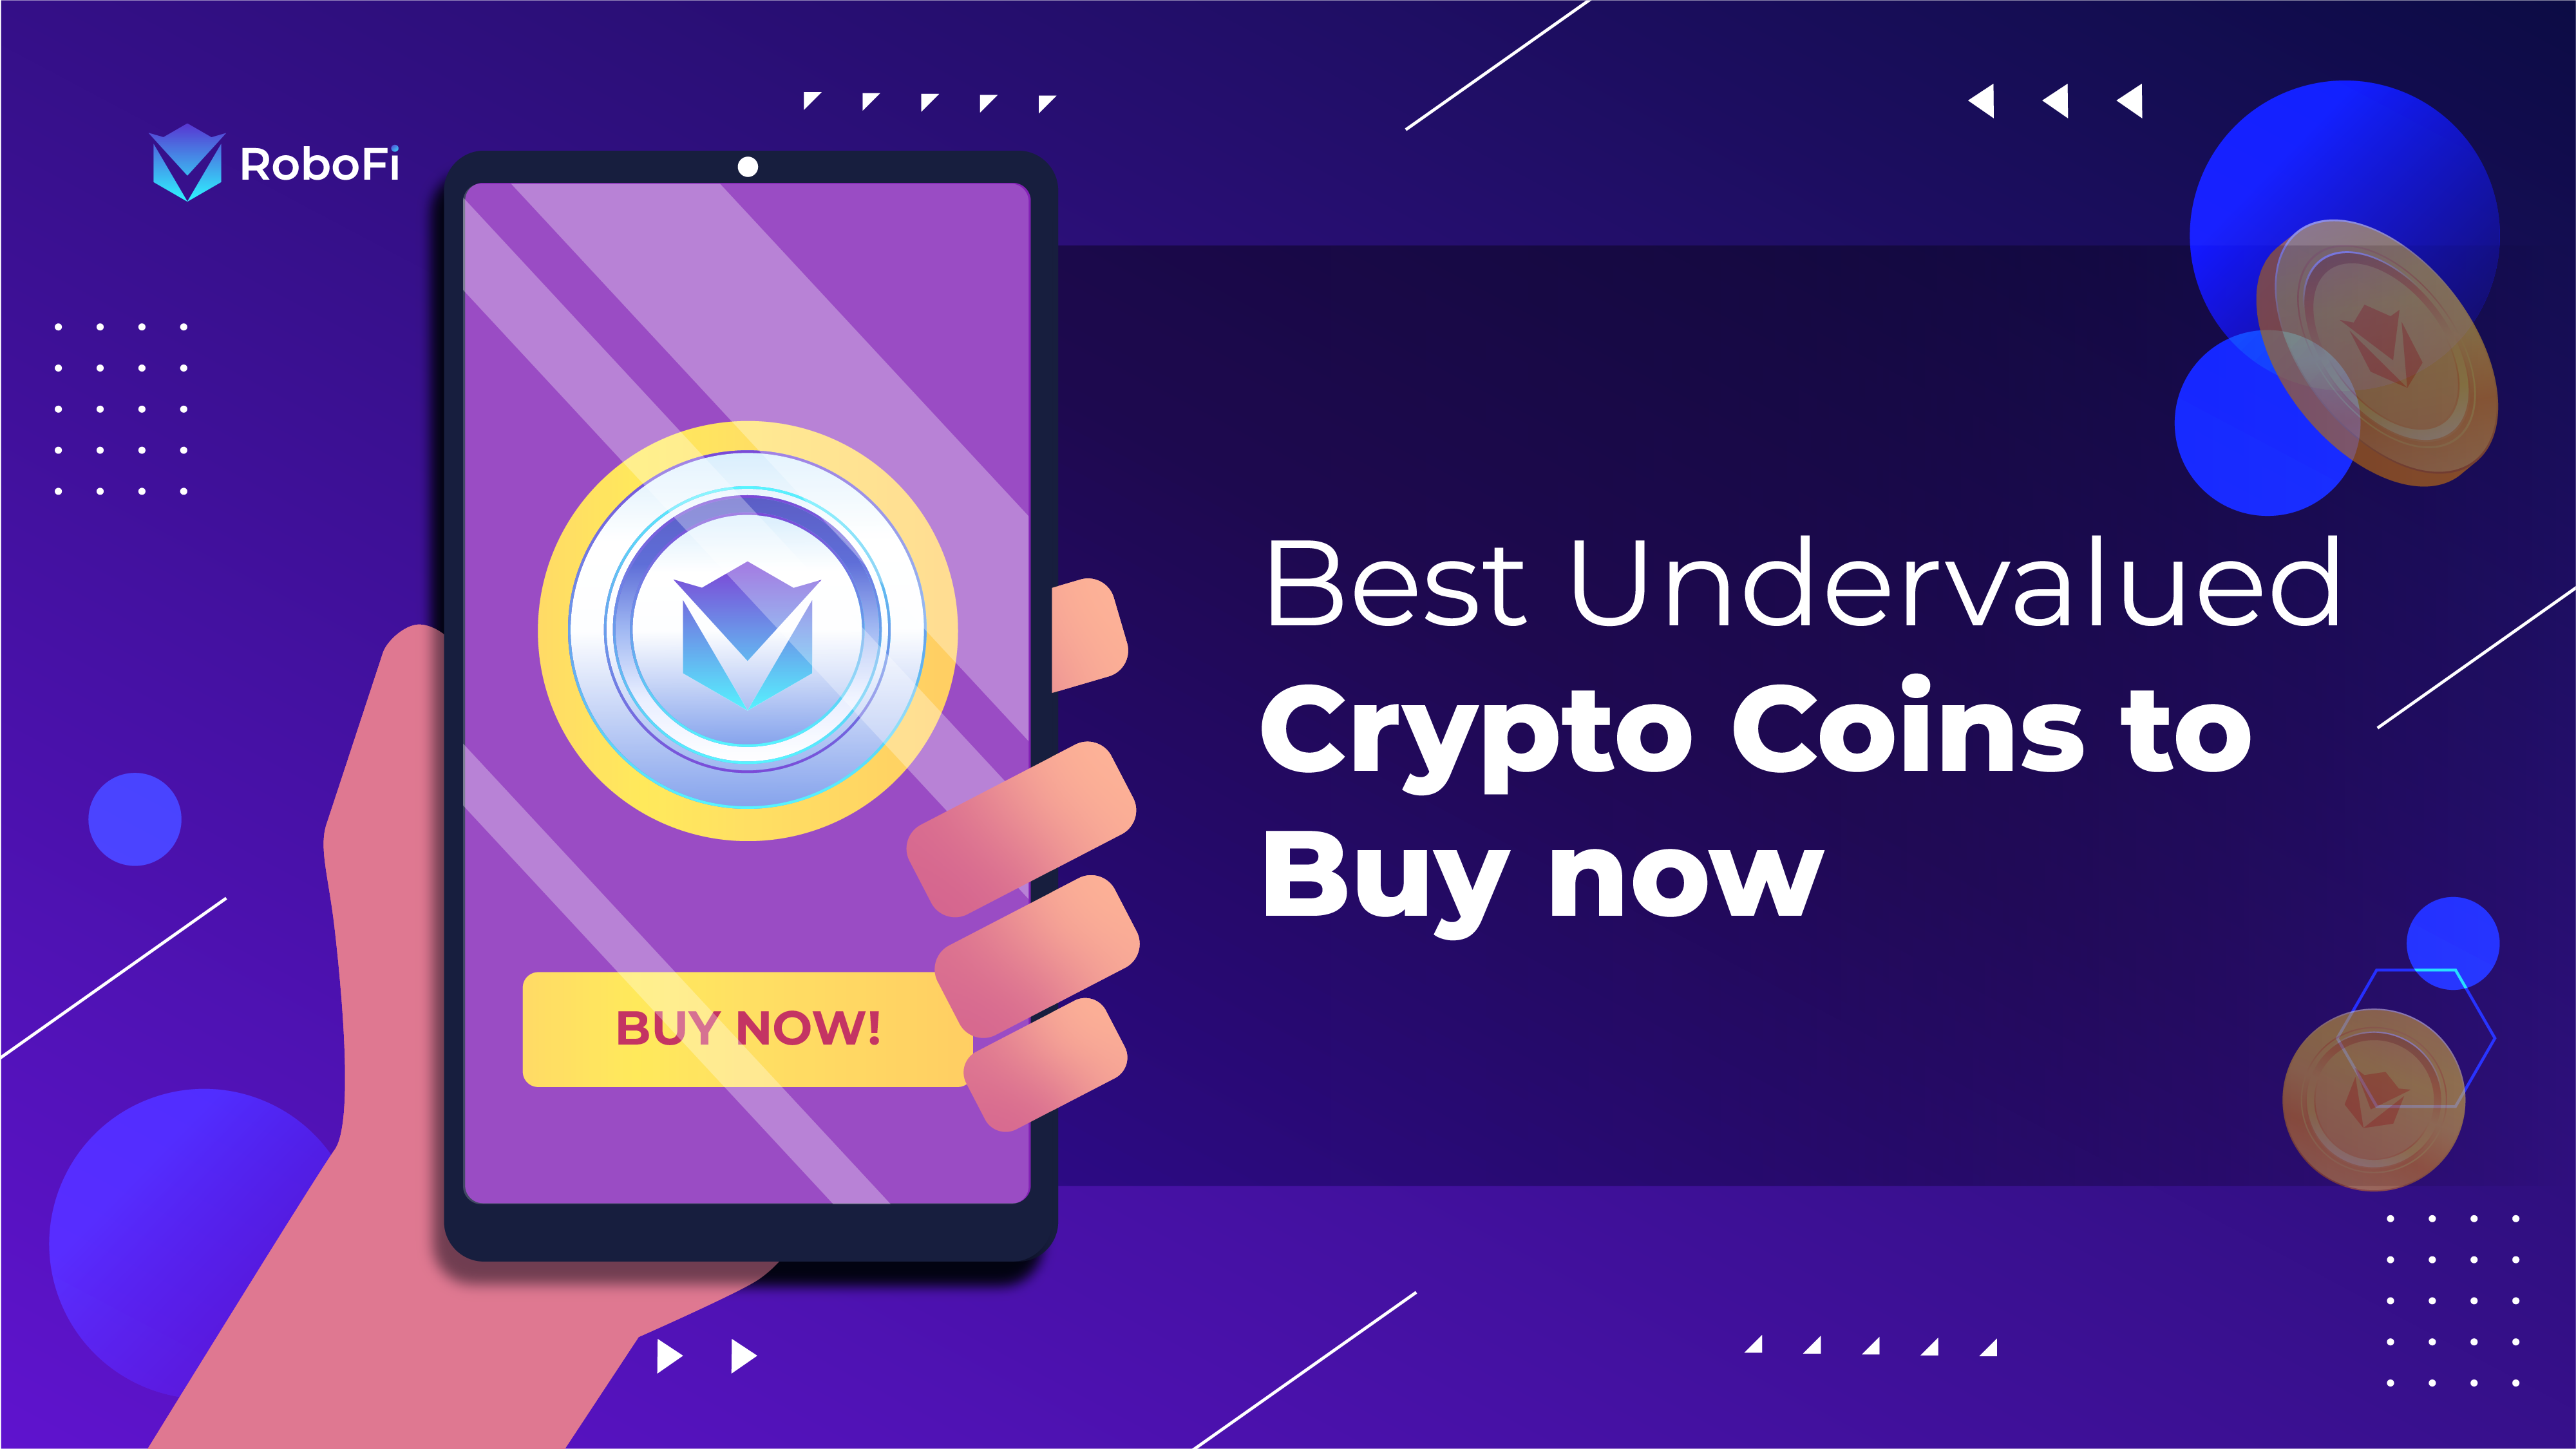 what are the most undervalued crypto coins right now